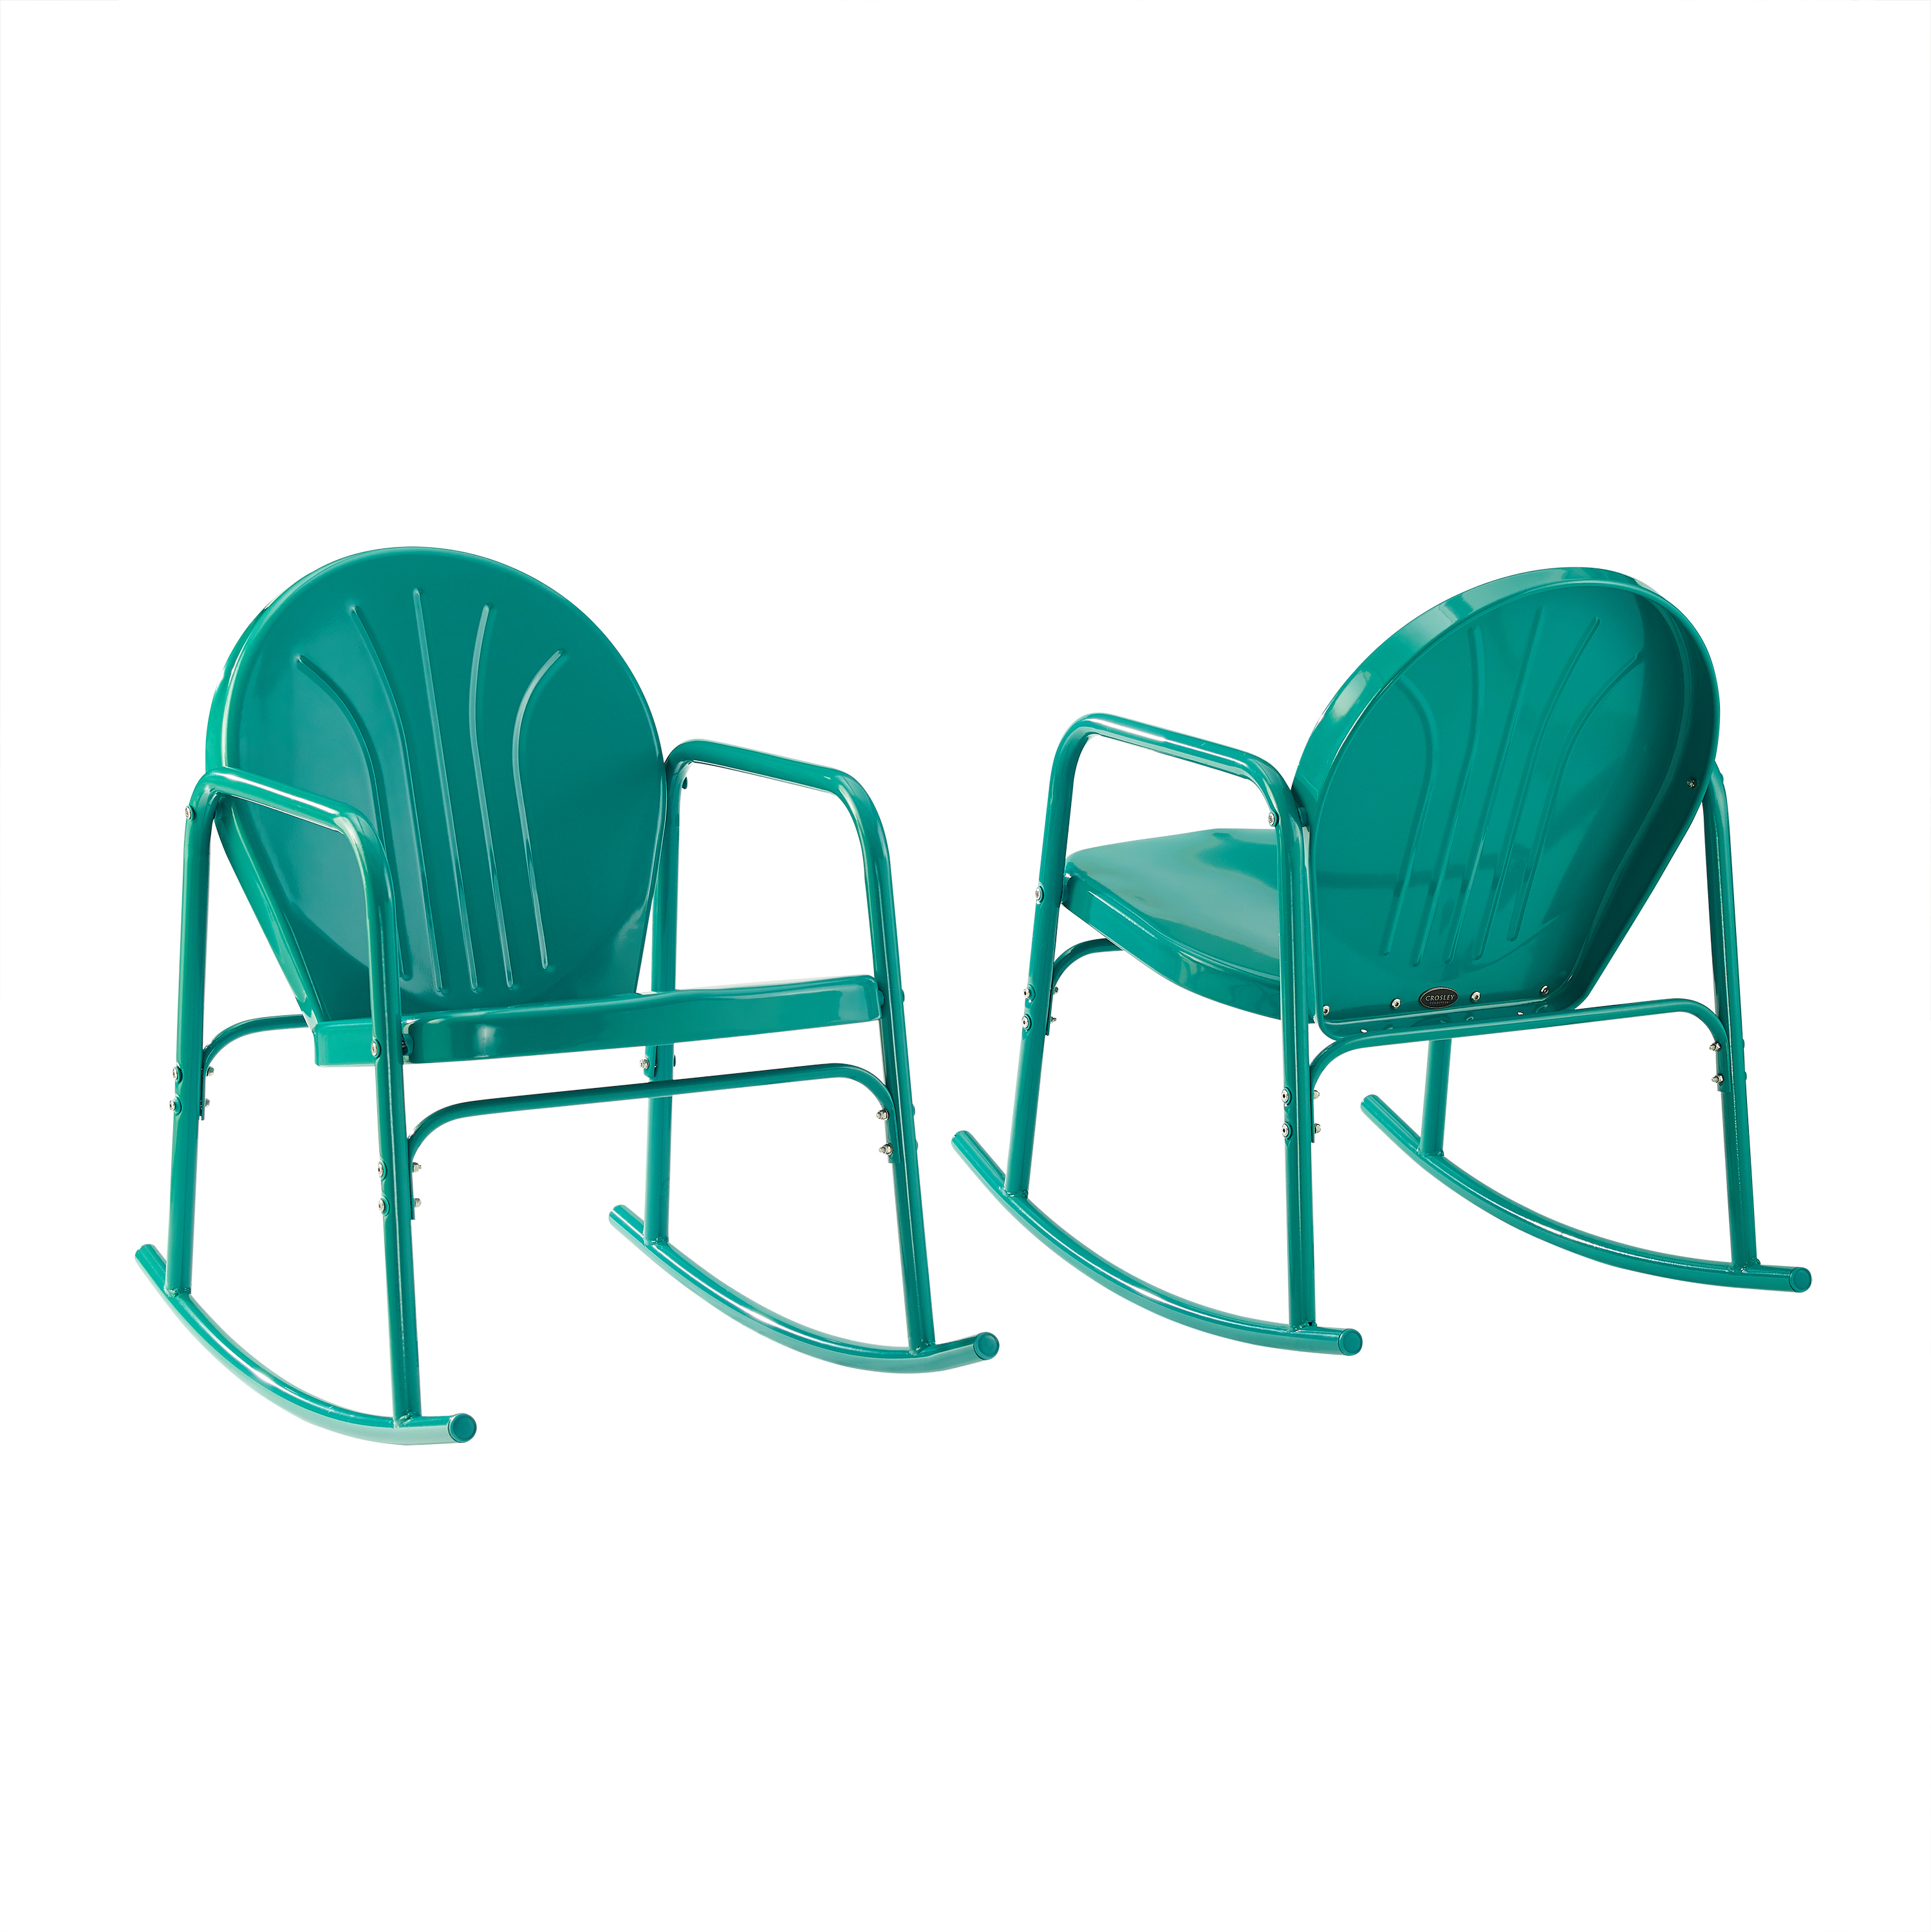 Crosley Furniture Griffith 2Pc Outdoor Powder Coated Rocking Chair Set, 2 Chairs, Green - image 5 of 13